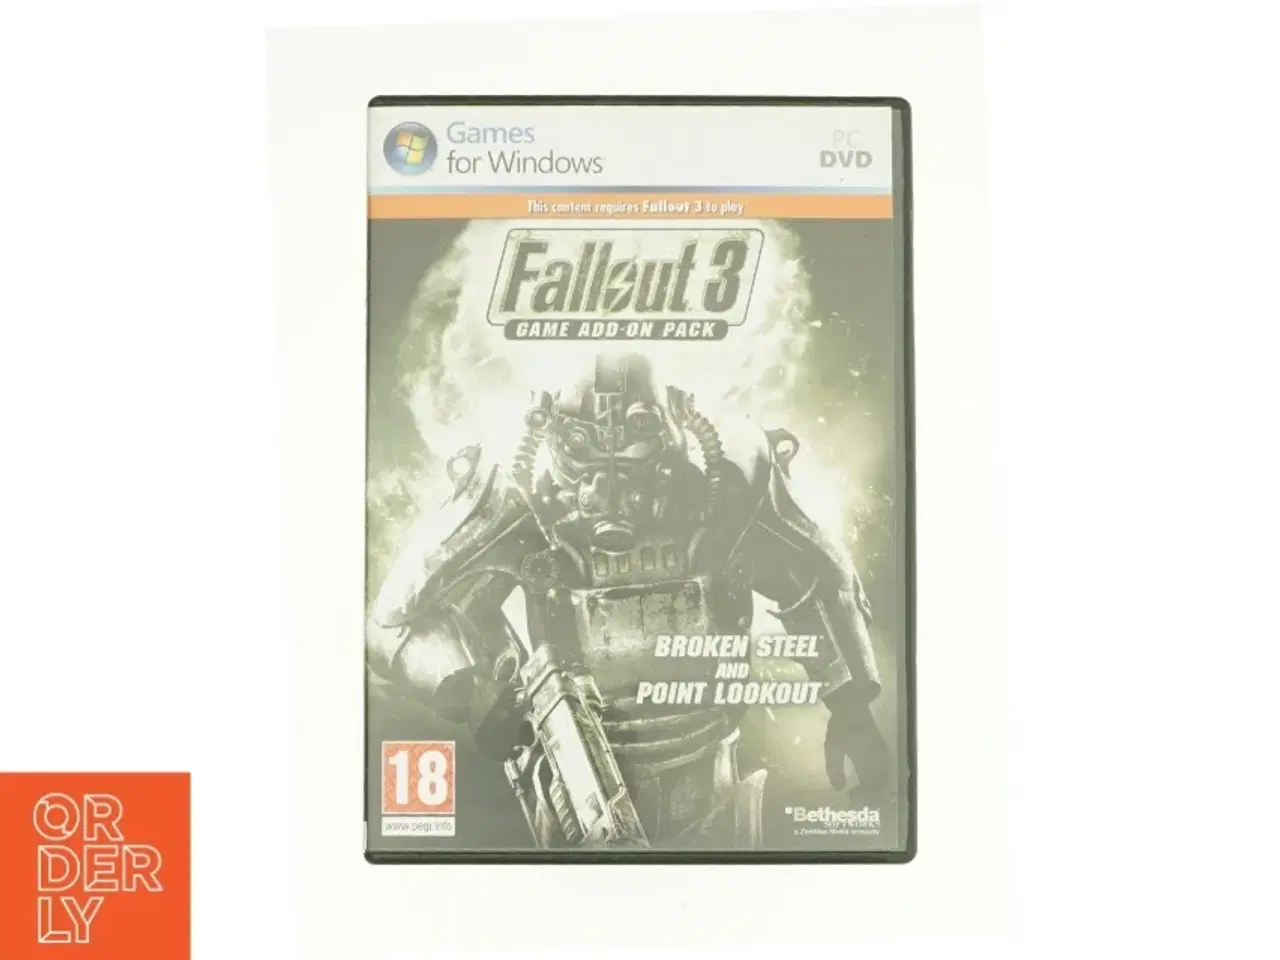 Billede 1 - Fallout 3: Game Add-on Pack - Broken Steel and Point Lookout (PC DVD) fra DVD